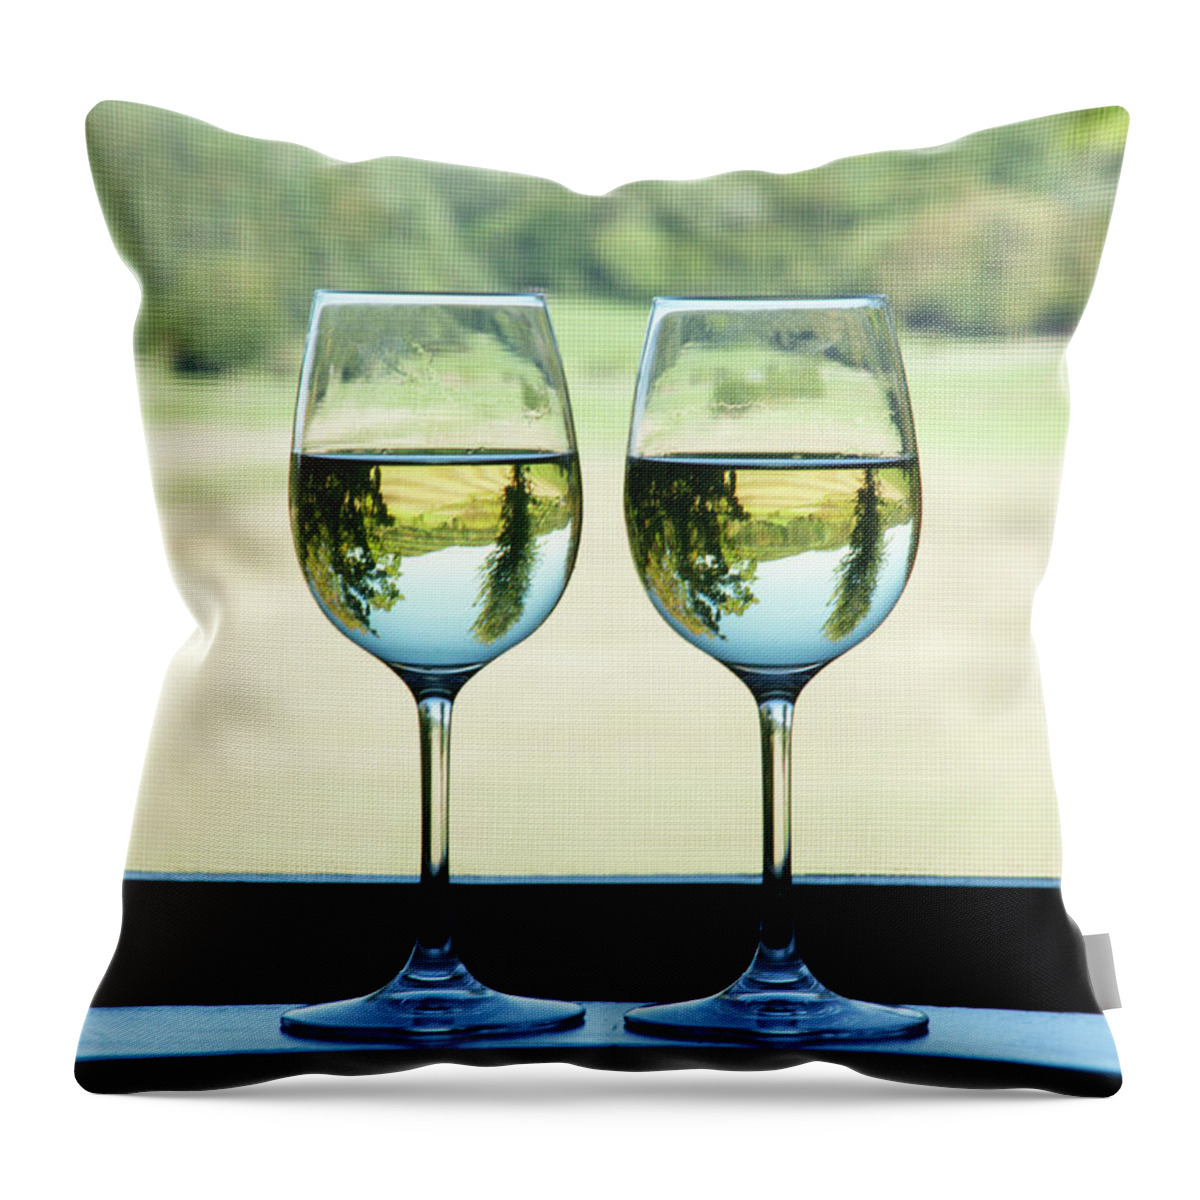 Two Objects Throw Pillow featuring the photograph White Wine On A Rural Windowsill by Bill Boch